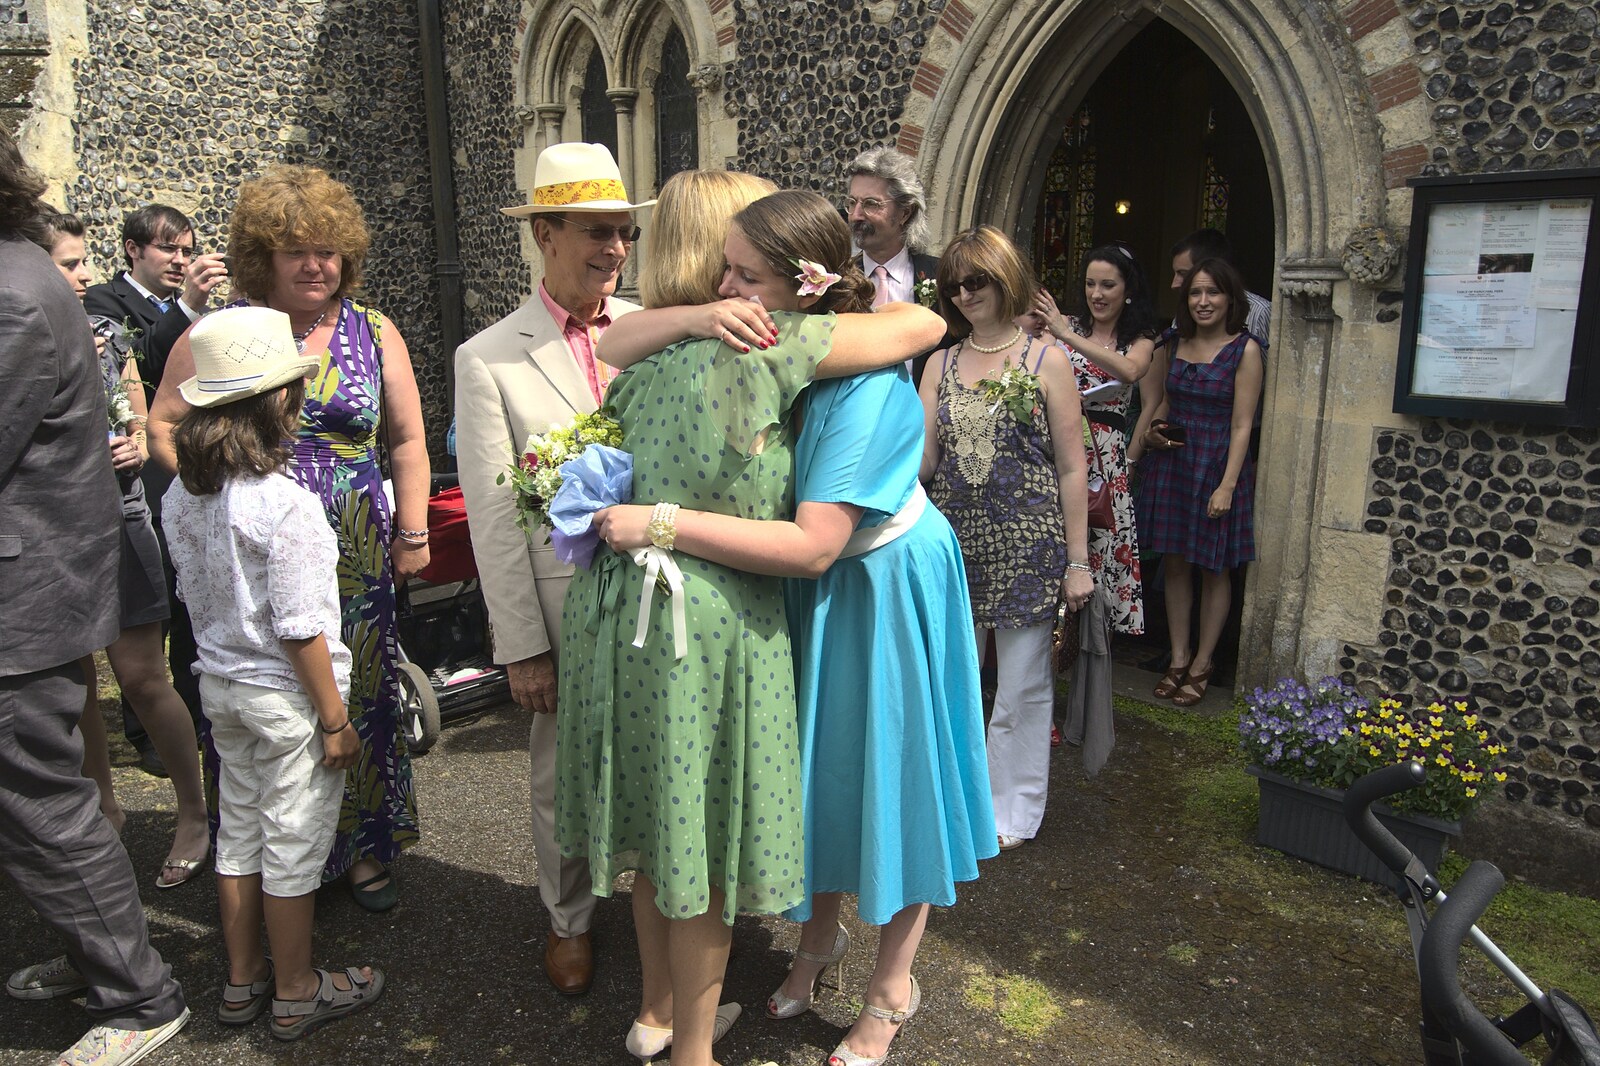 Isobel hugs Nosher's mother from Nosher and Isobel's Wedding, Brome, Suffolk - 3rd July 2010